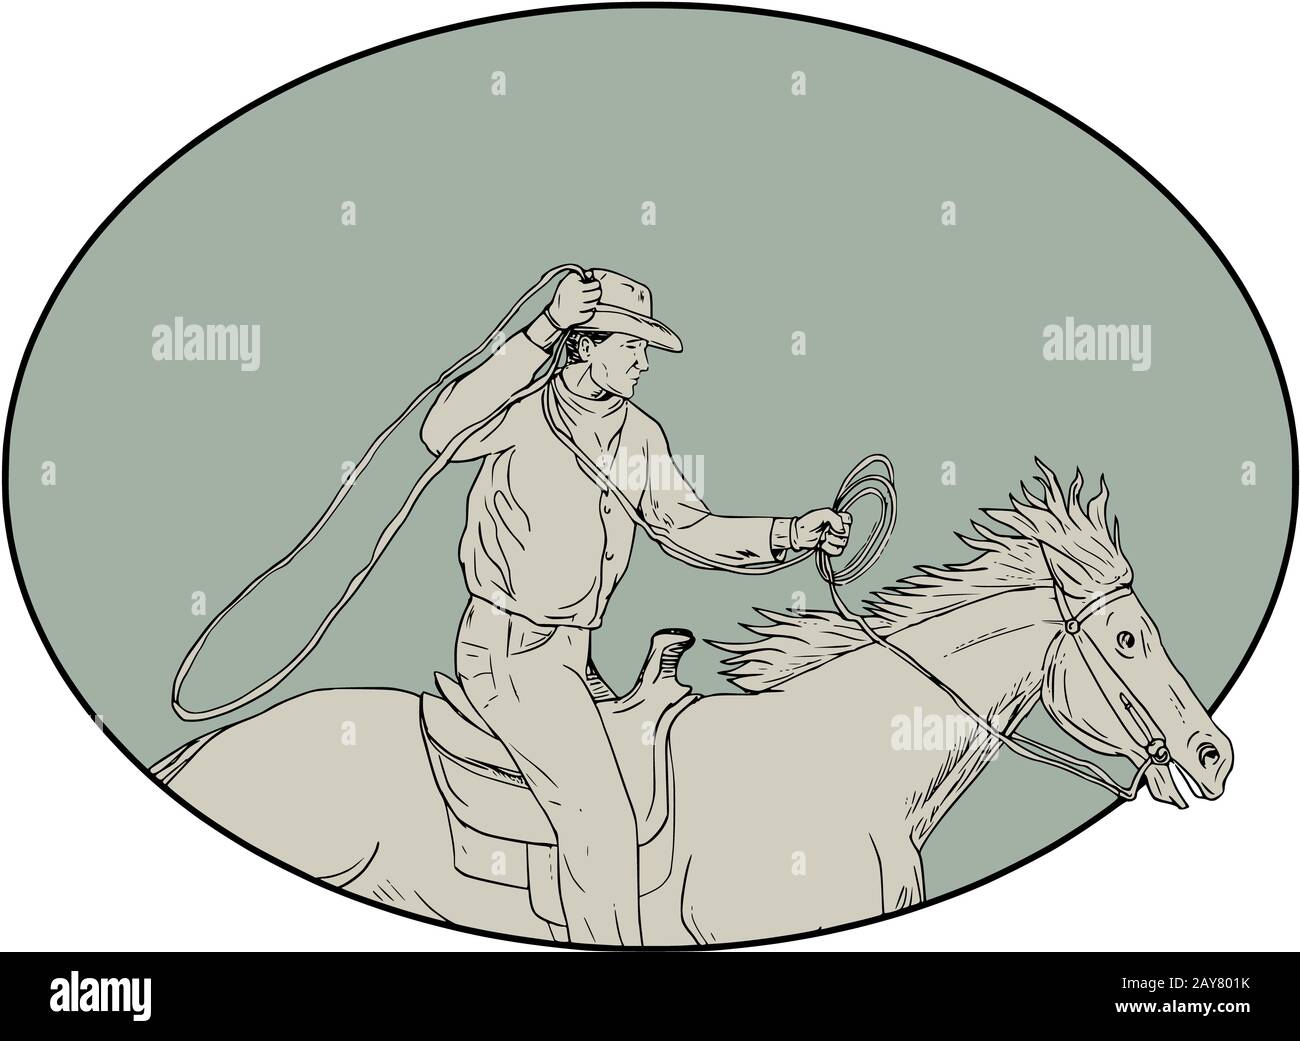 Cowboy Riding Horse Lasso Oval Drawing Stock Photo